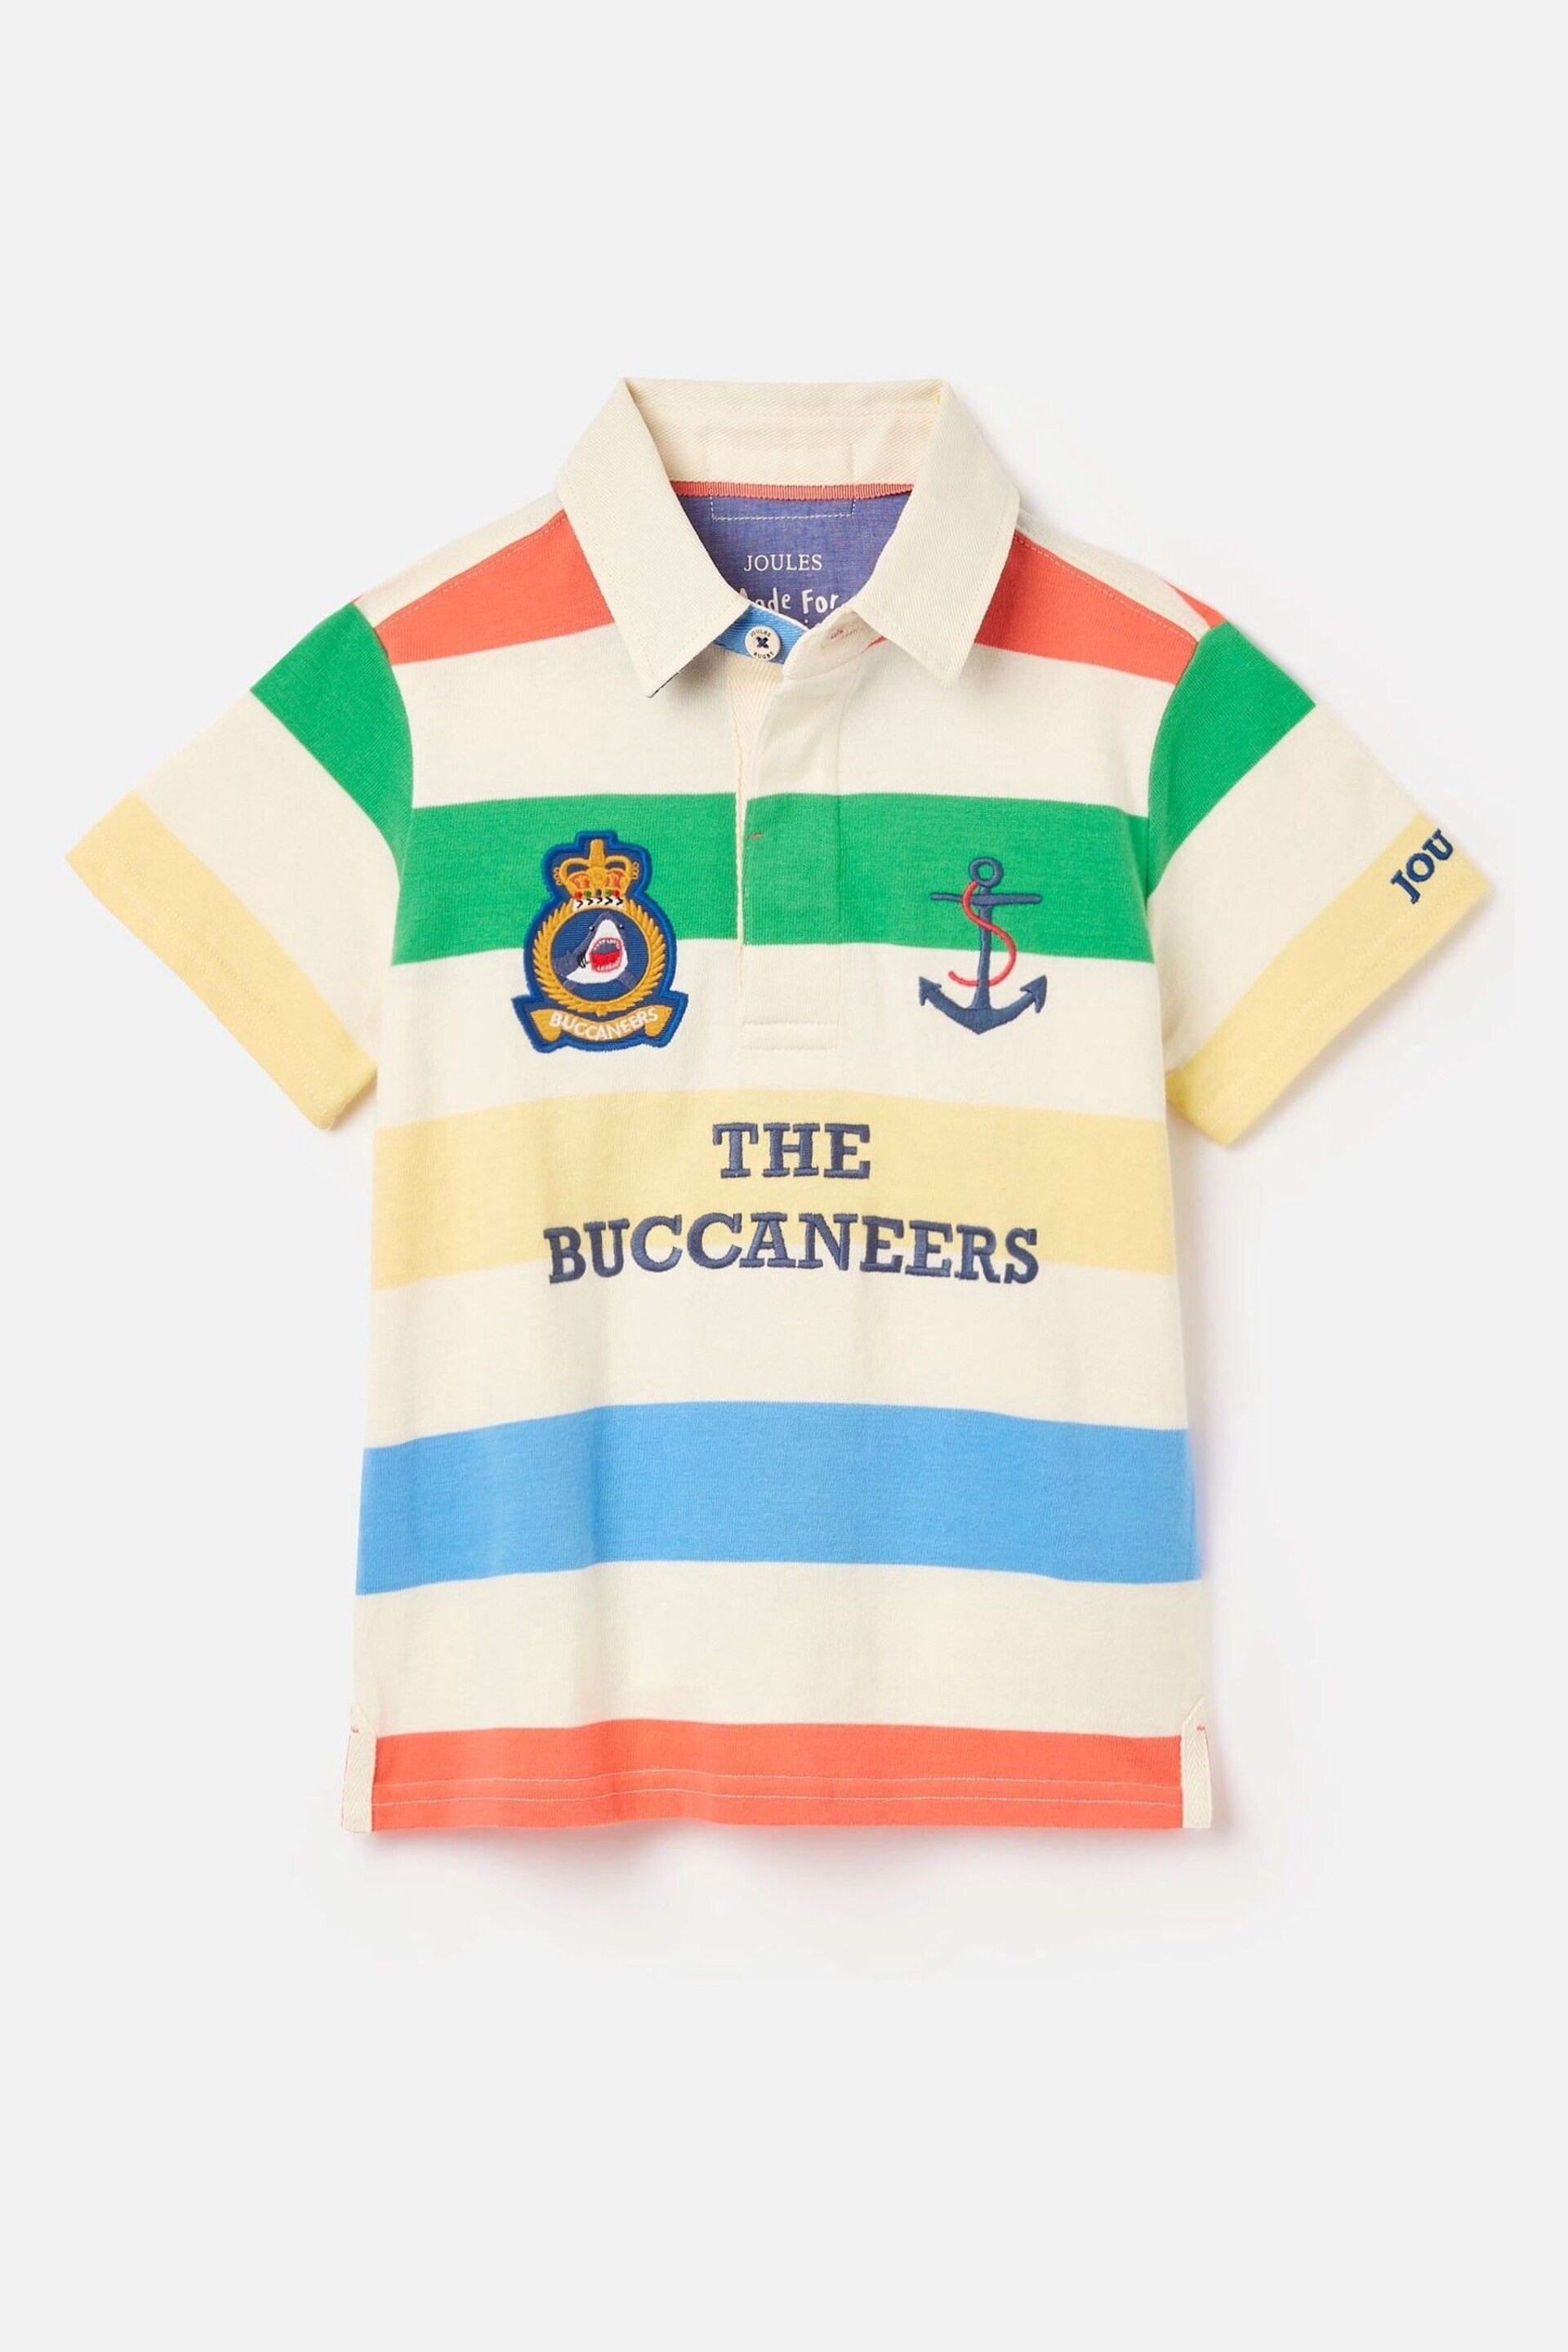 Joules Tournament Multi Rugby Jersey Polo Shirt - Image 4 of 9